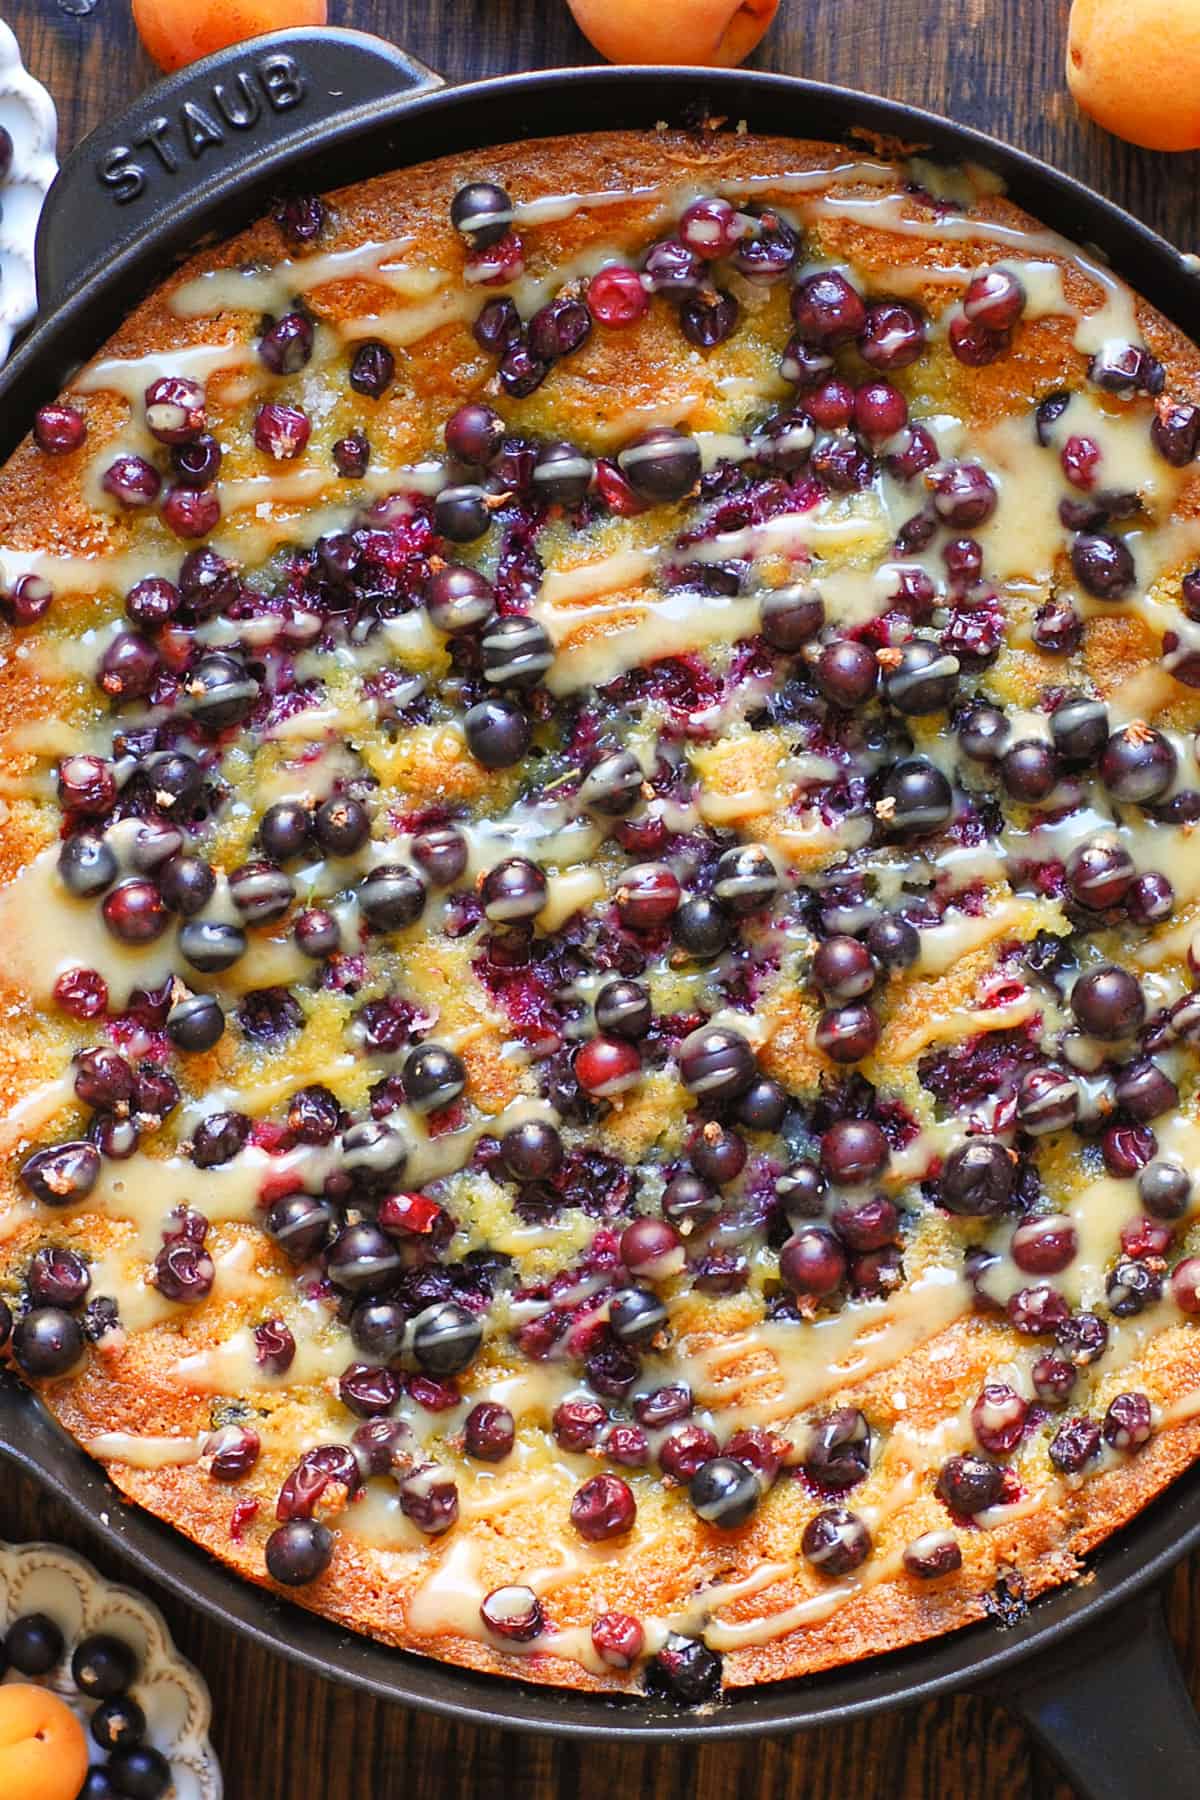 Black Currant Cake topped with fresh black currants and drizzled with maple cream - in a cast iron skillet.